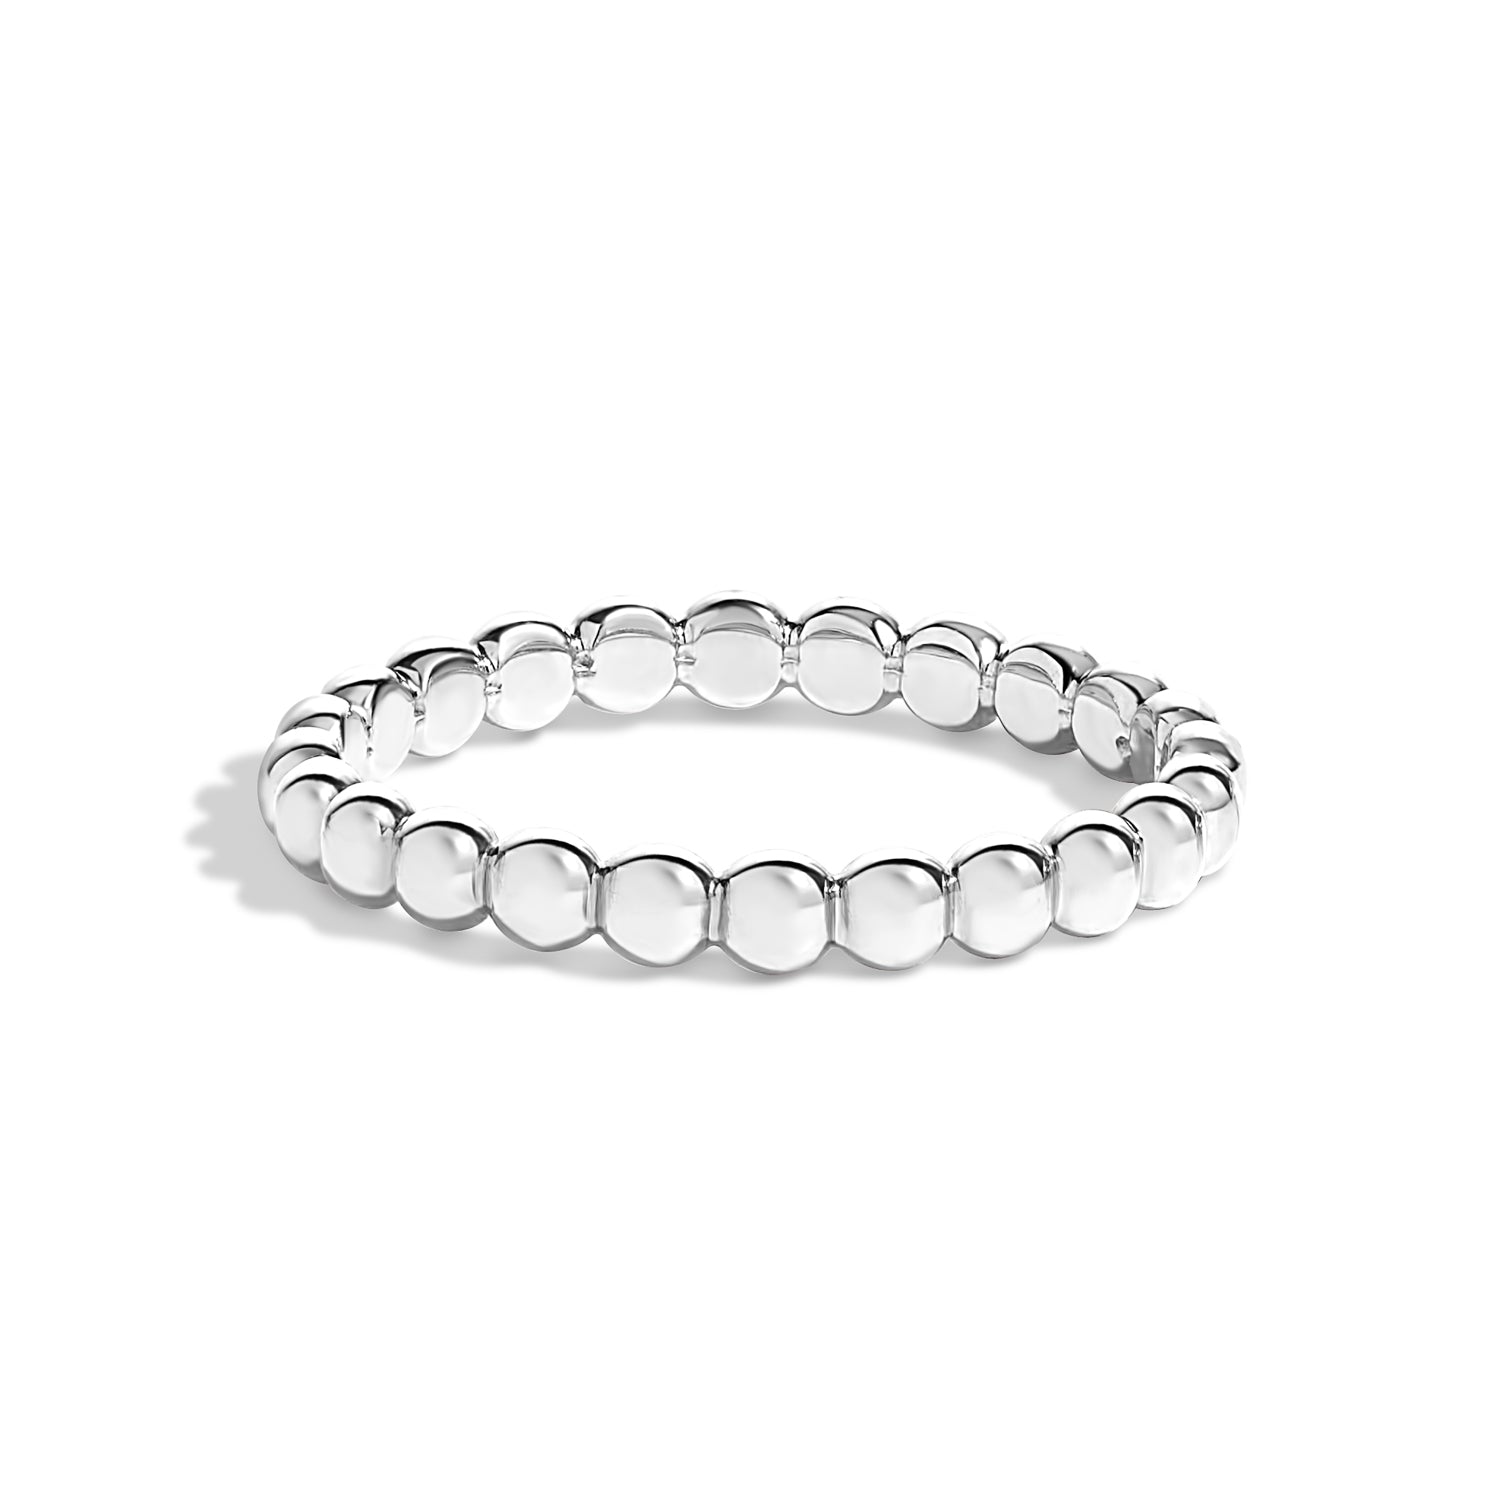 Shahla Karimi Jewelry Beaded Band in 14K White Gold or Platinum